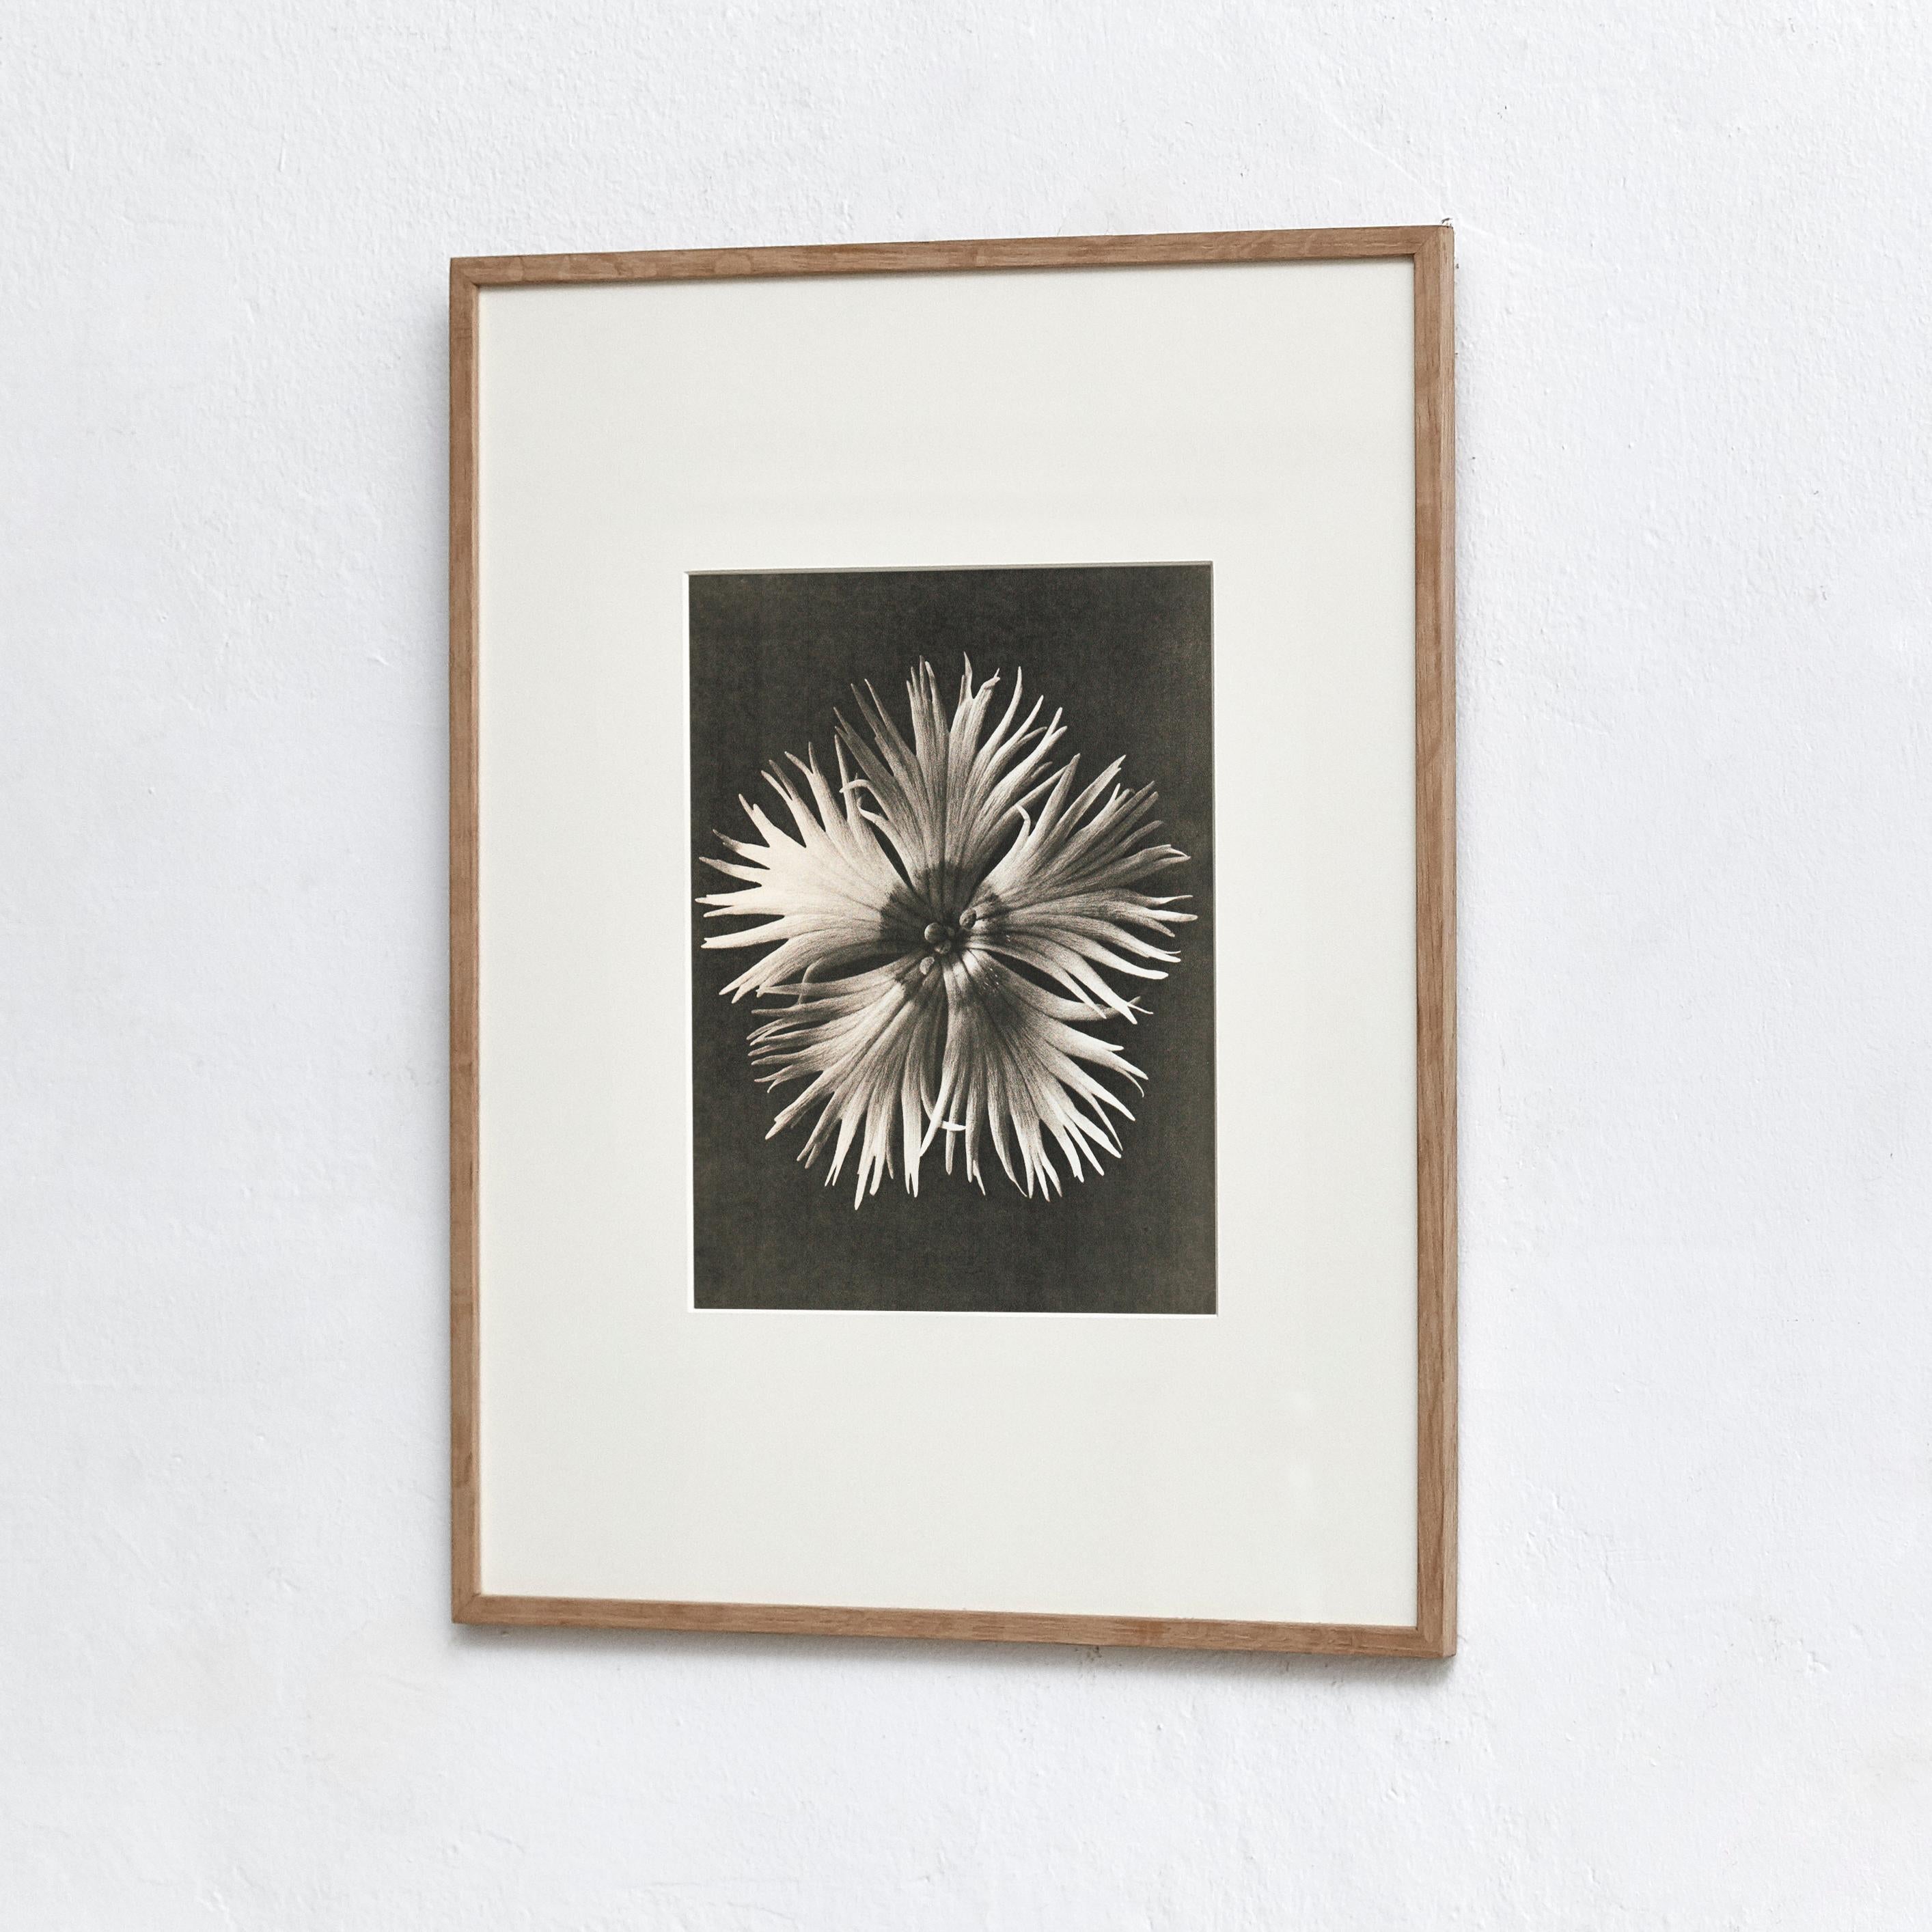 Karl Blossfeldt photogravure from the edition of the book 'Wunder in der Natur' in 1942.

Photography number 14. 'Dianthus plumarius. Federnelke in 8 facher Vergrößerung.'

In original condition, with minor wear consistent with age and use,